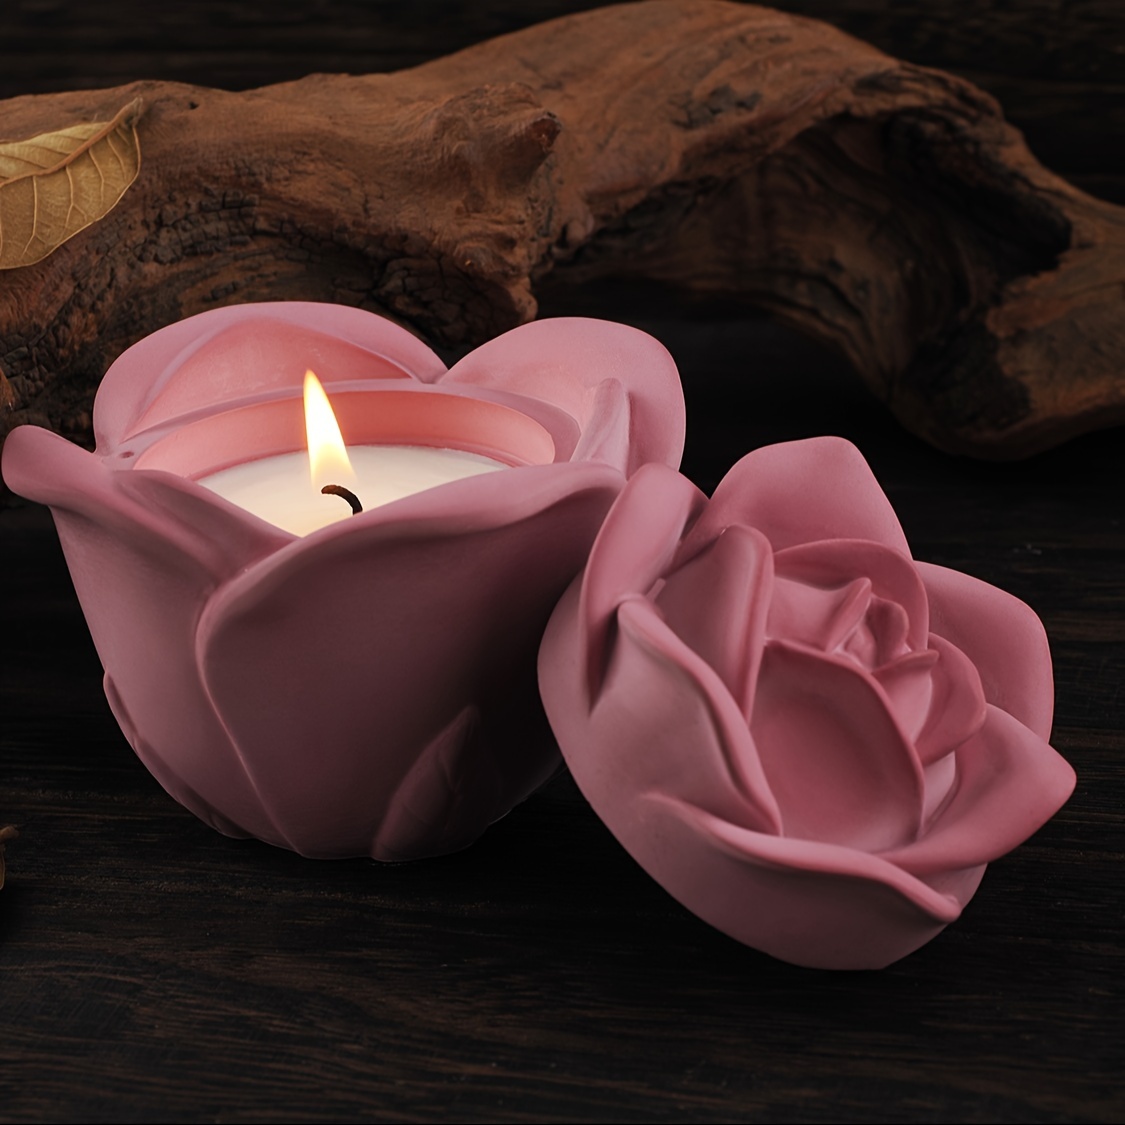 

Silicone Rose Flower Candle Holder Mold - Handcrafted Wax Molding Materials For Home Ambiance Decor, Tabletop Display, Epoxy Resin Crafting - No Power Required